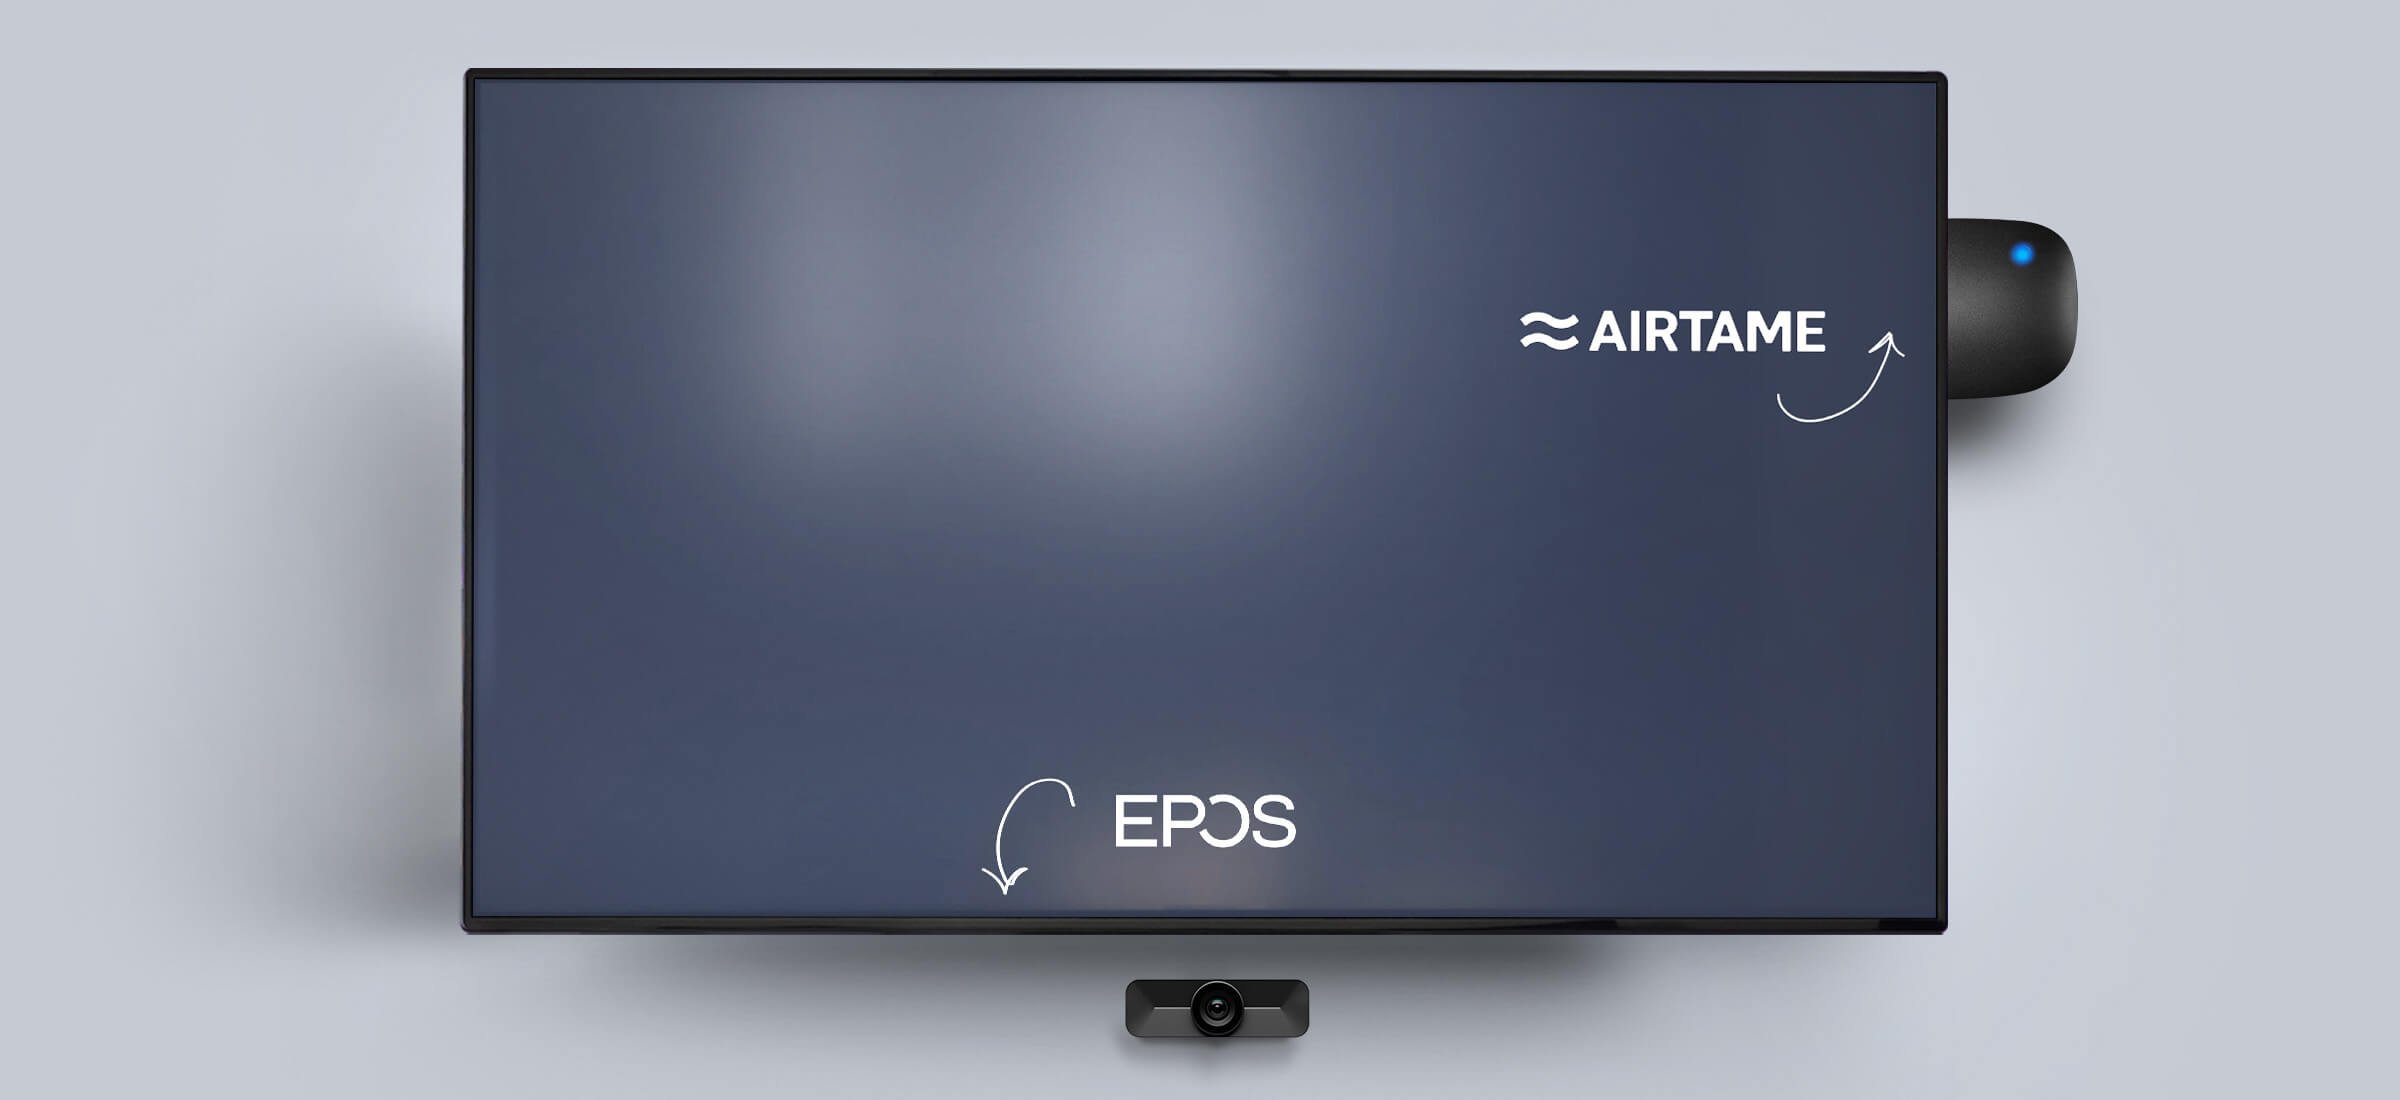 Airtame Partners with Danish Company EPOS to Provide Simple and Easy Hybrid Meetings in Enterprise